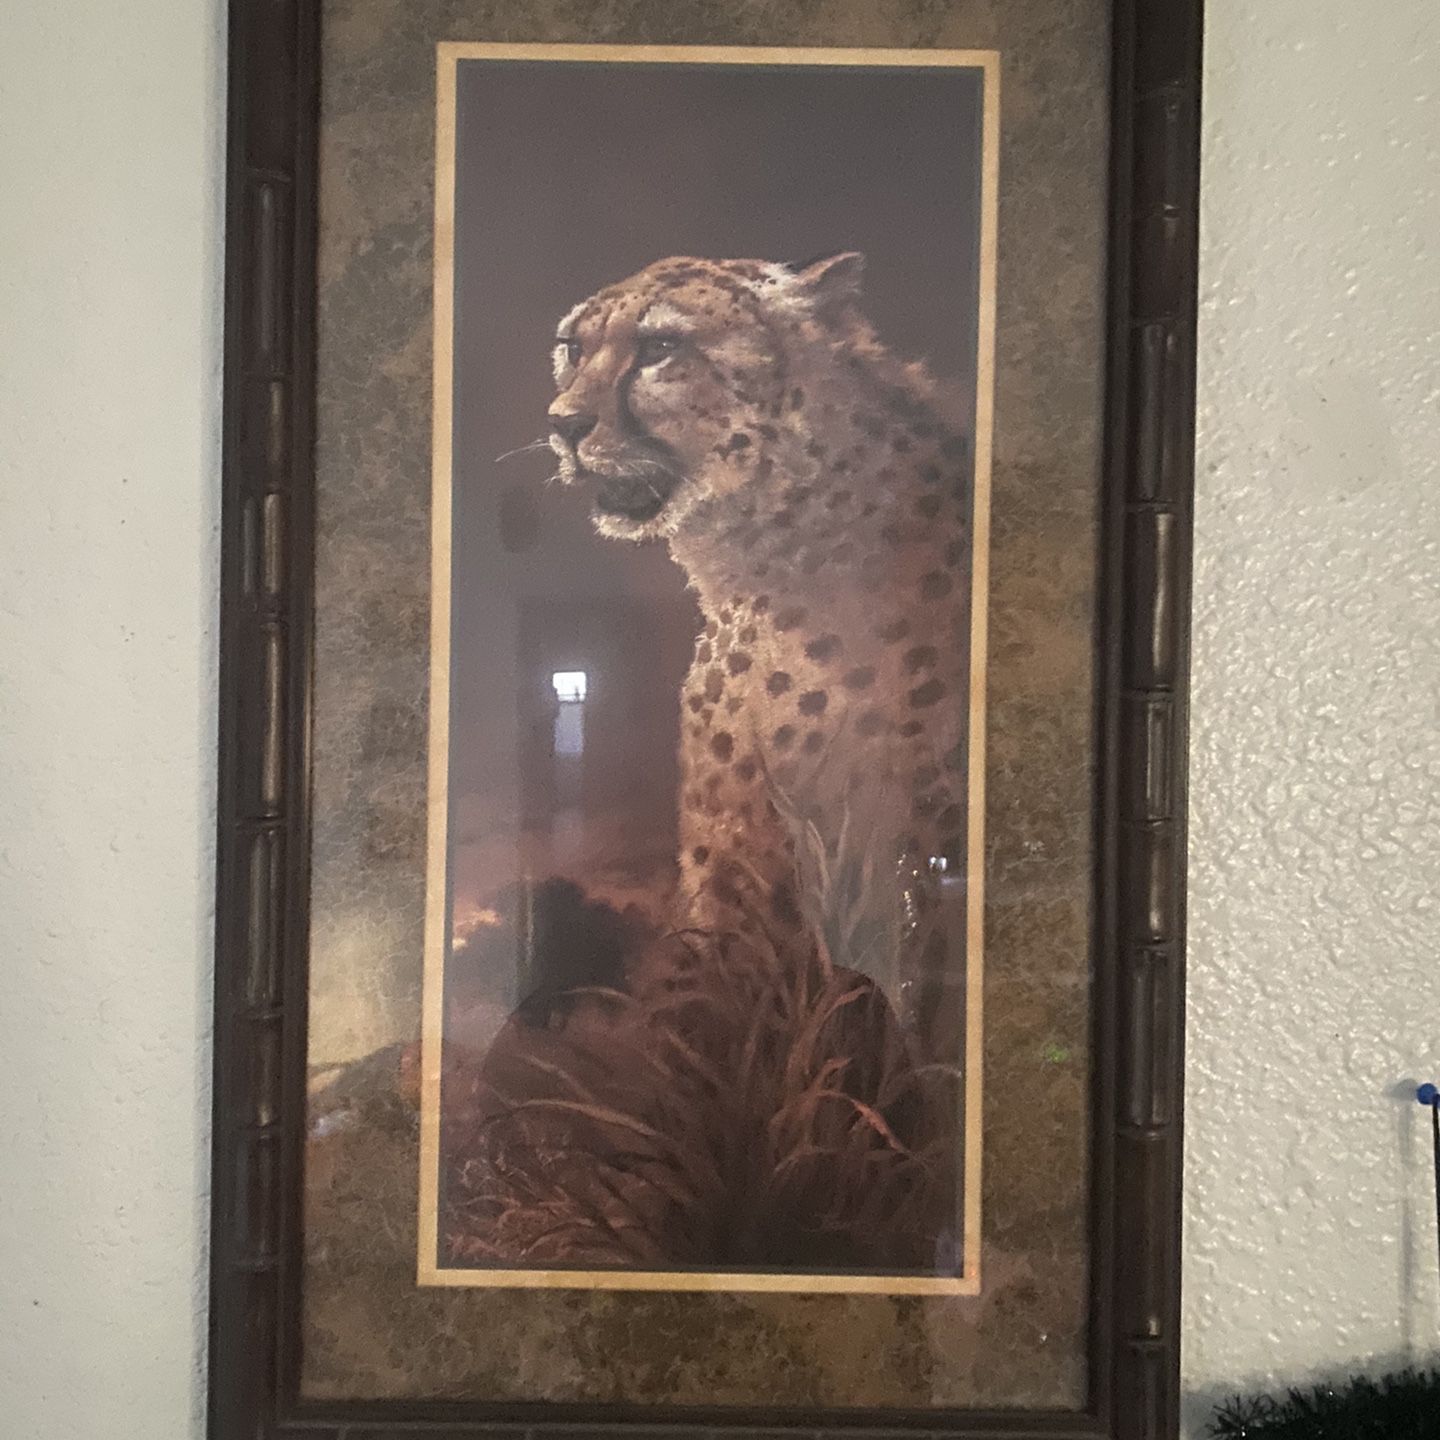 Tiger, Lion, Wall Picture Decor And Matching Mirror,